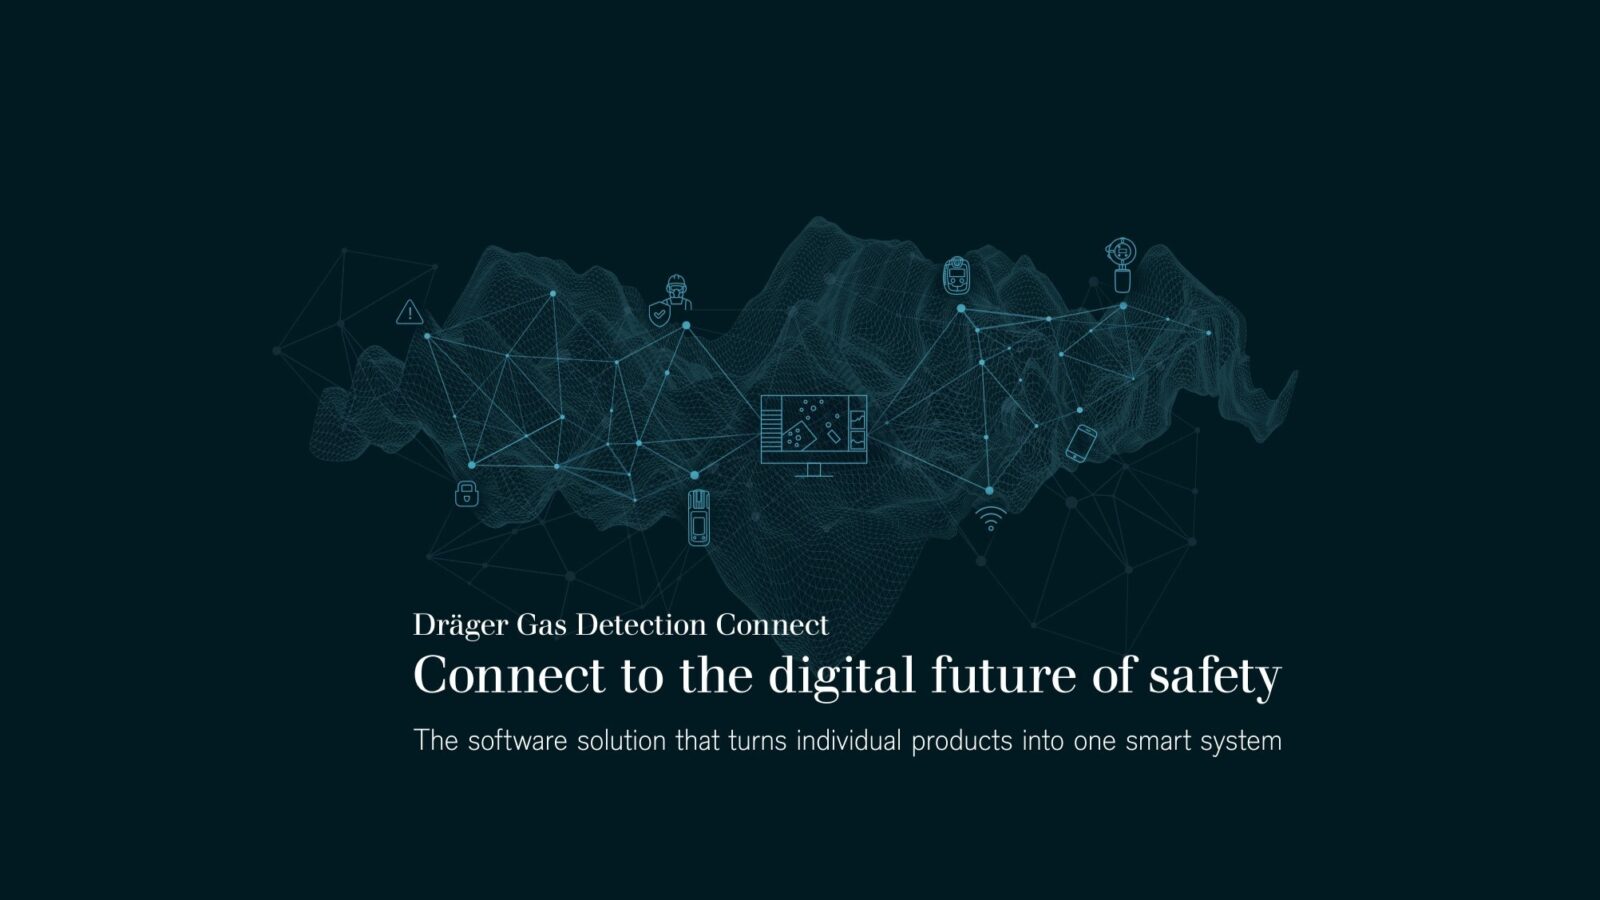 The digital future of gas detection compliance